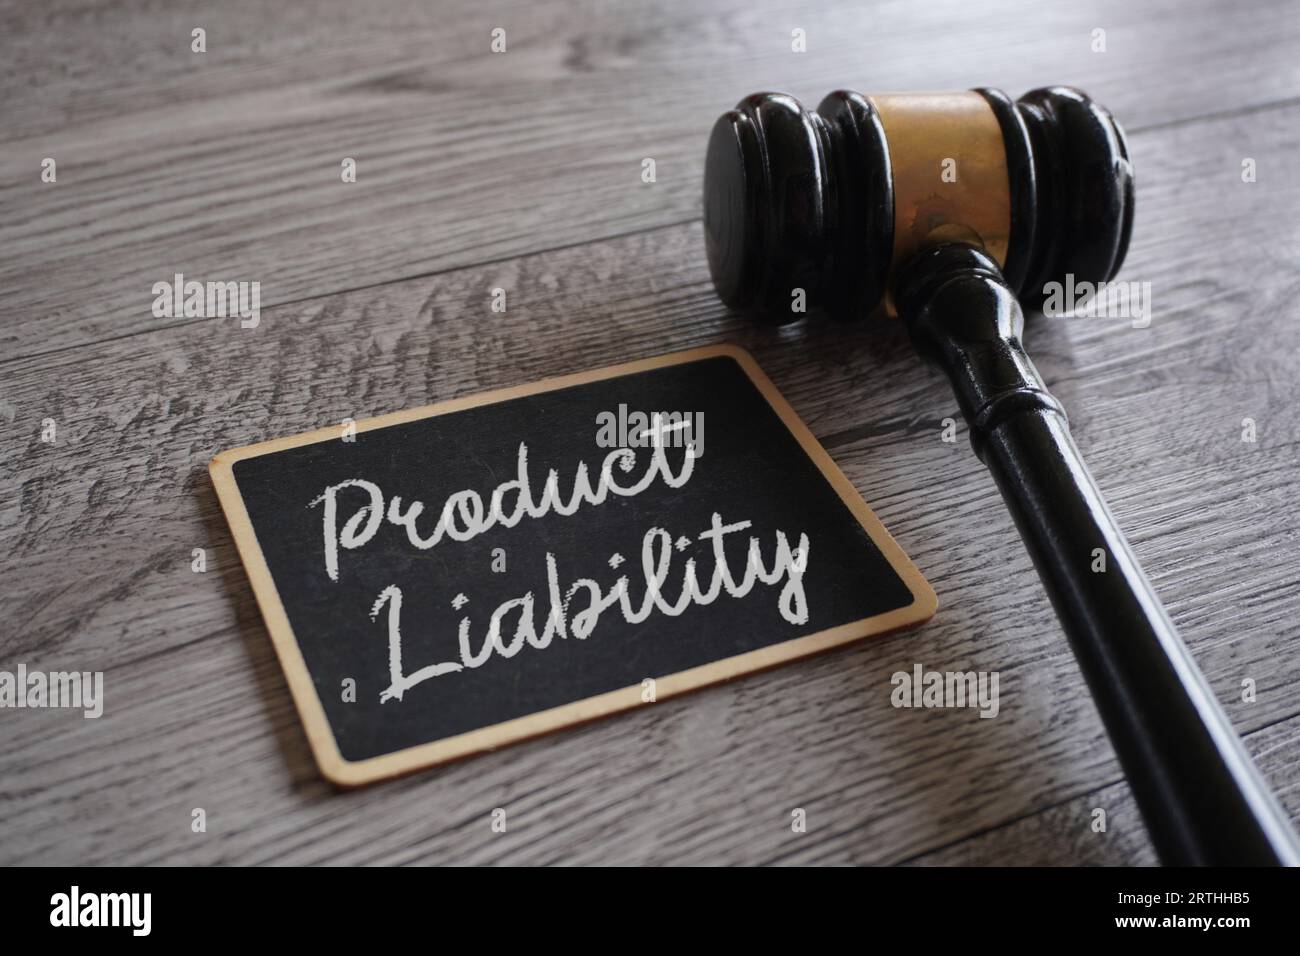 Closeup image of judge gavel and text PRODUCT LIABILITY on table. Stock Photo